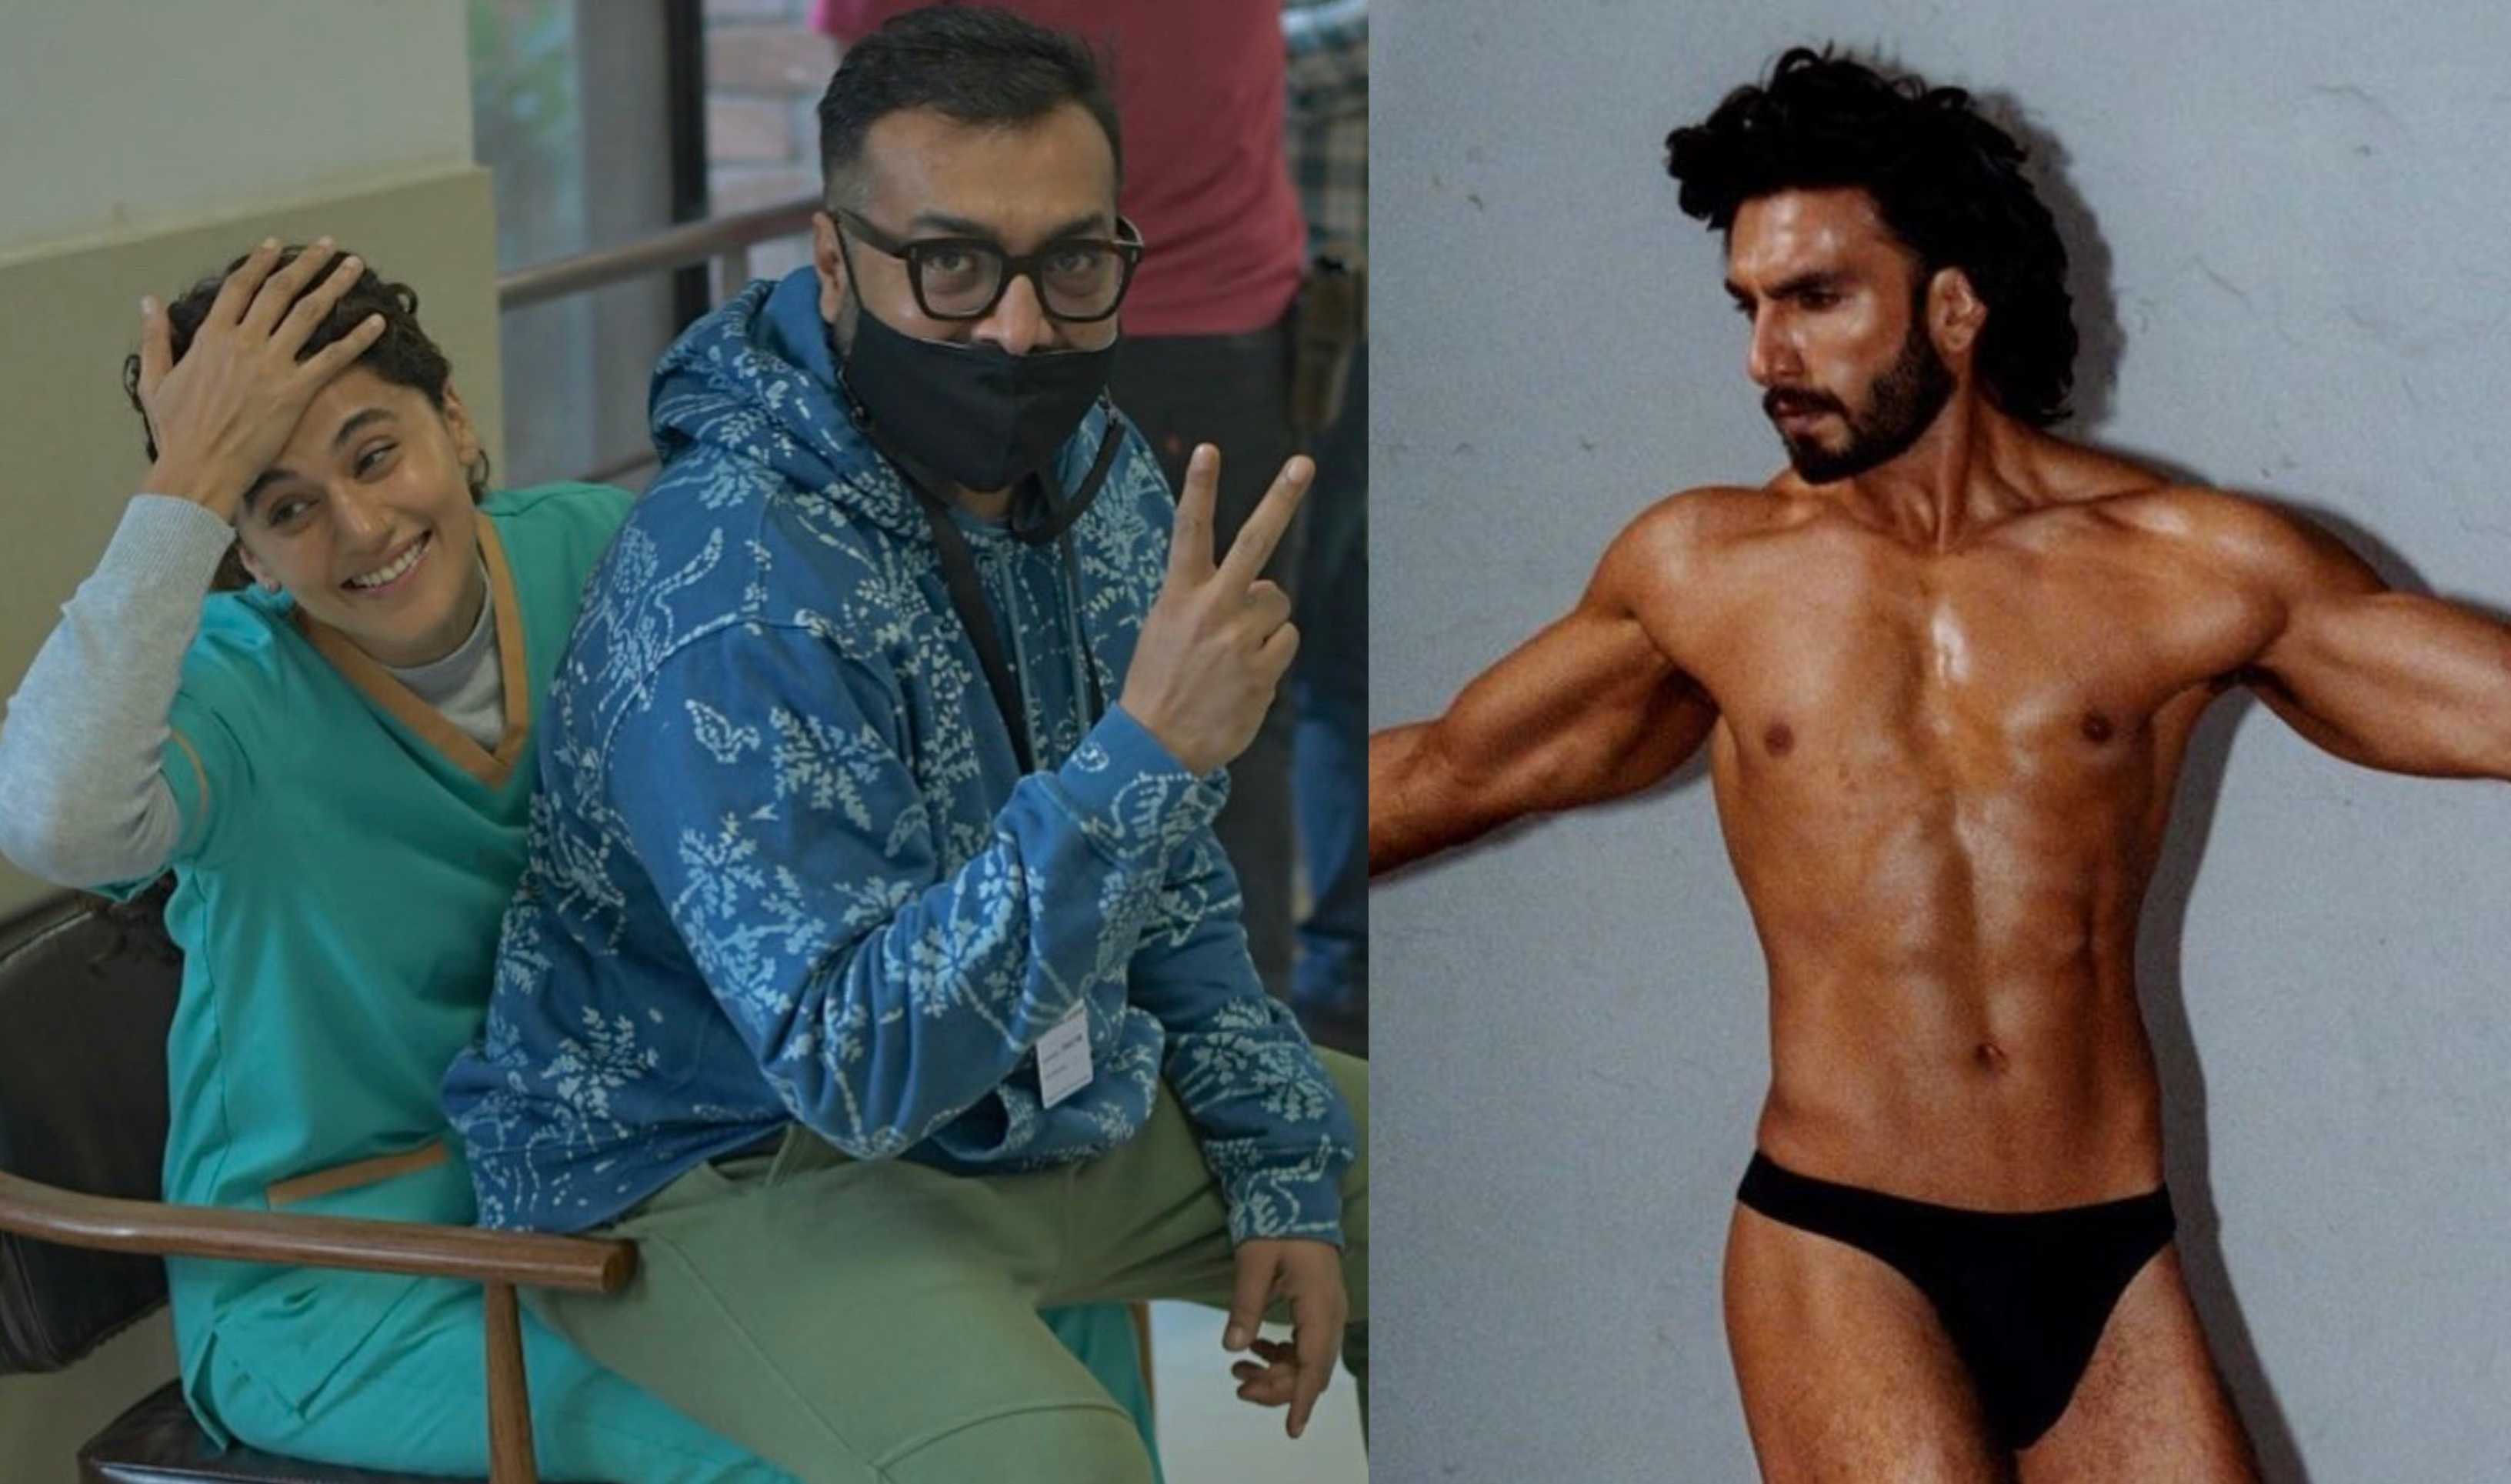 Anurag Kashyap reveals the real reason why Taapsee Pannu doesn’t want him to pose nude like Ranveer Singh